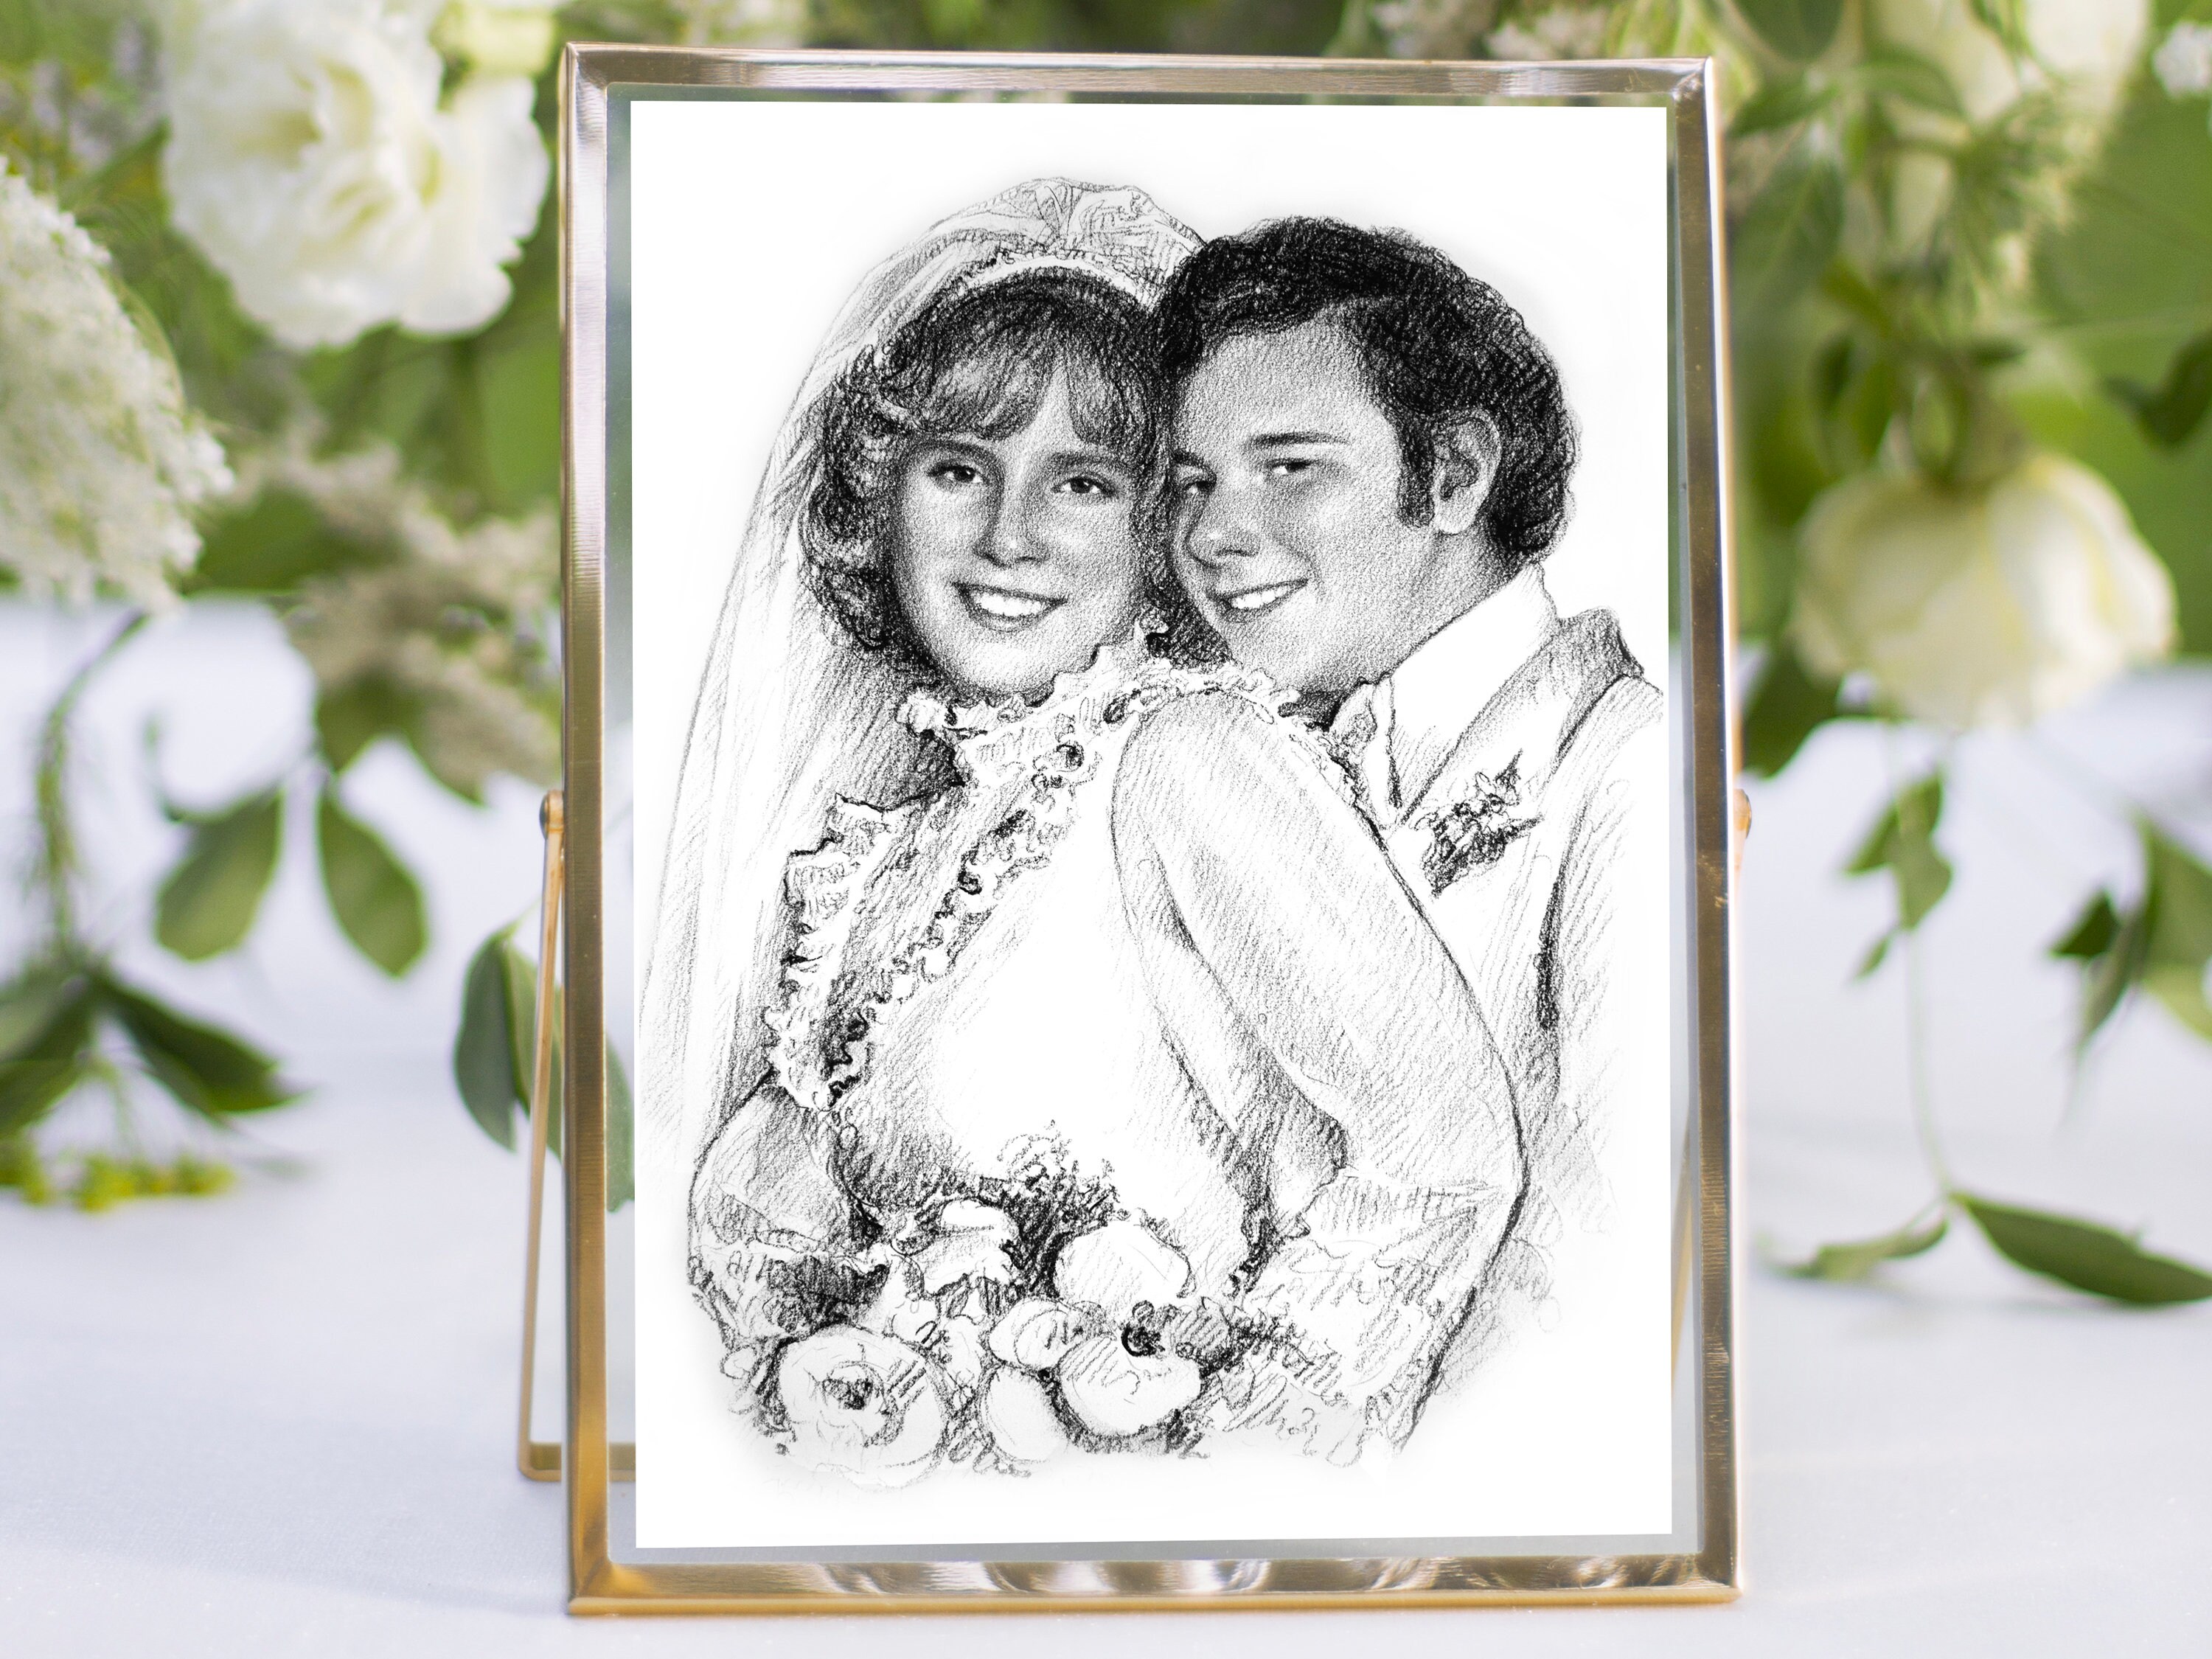 Details about   Personalized Anniversary Gift Watercolor Portrait from YOUR Photo Men's Gift 